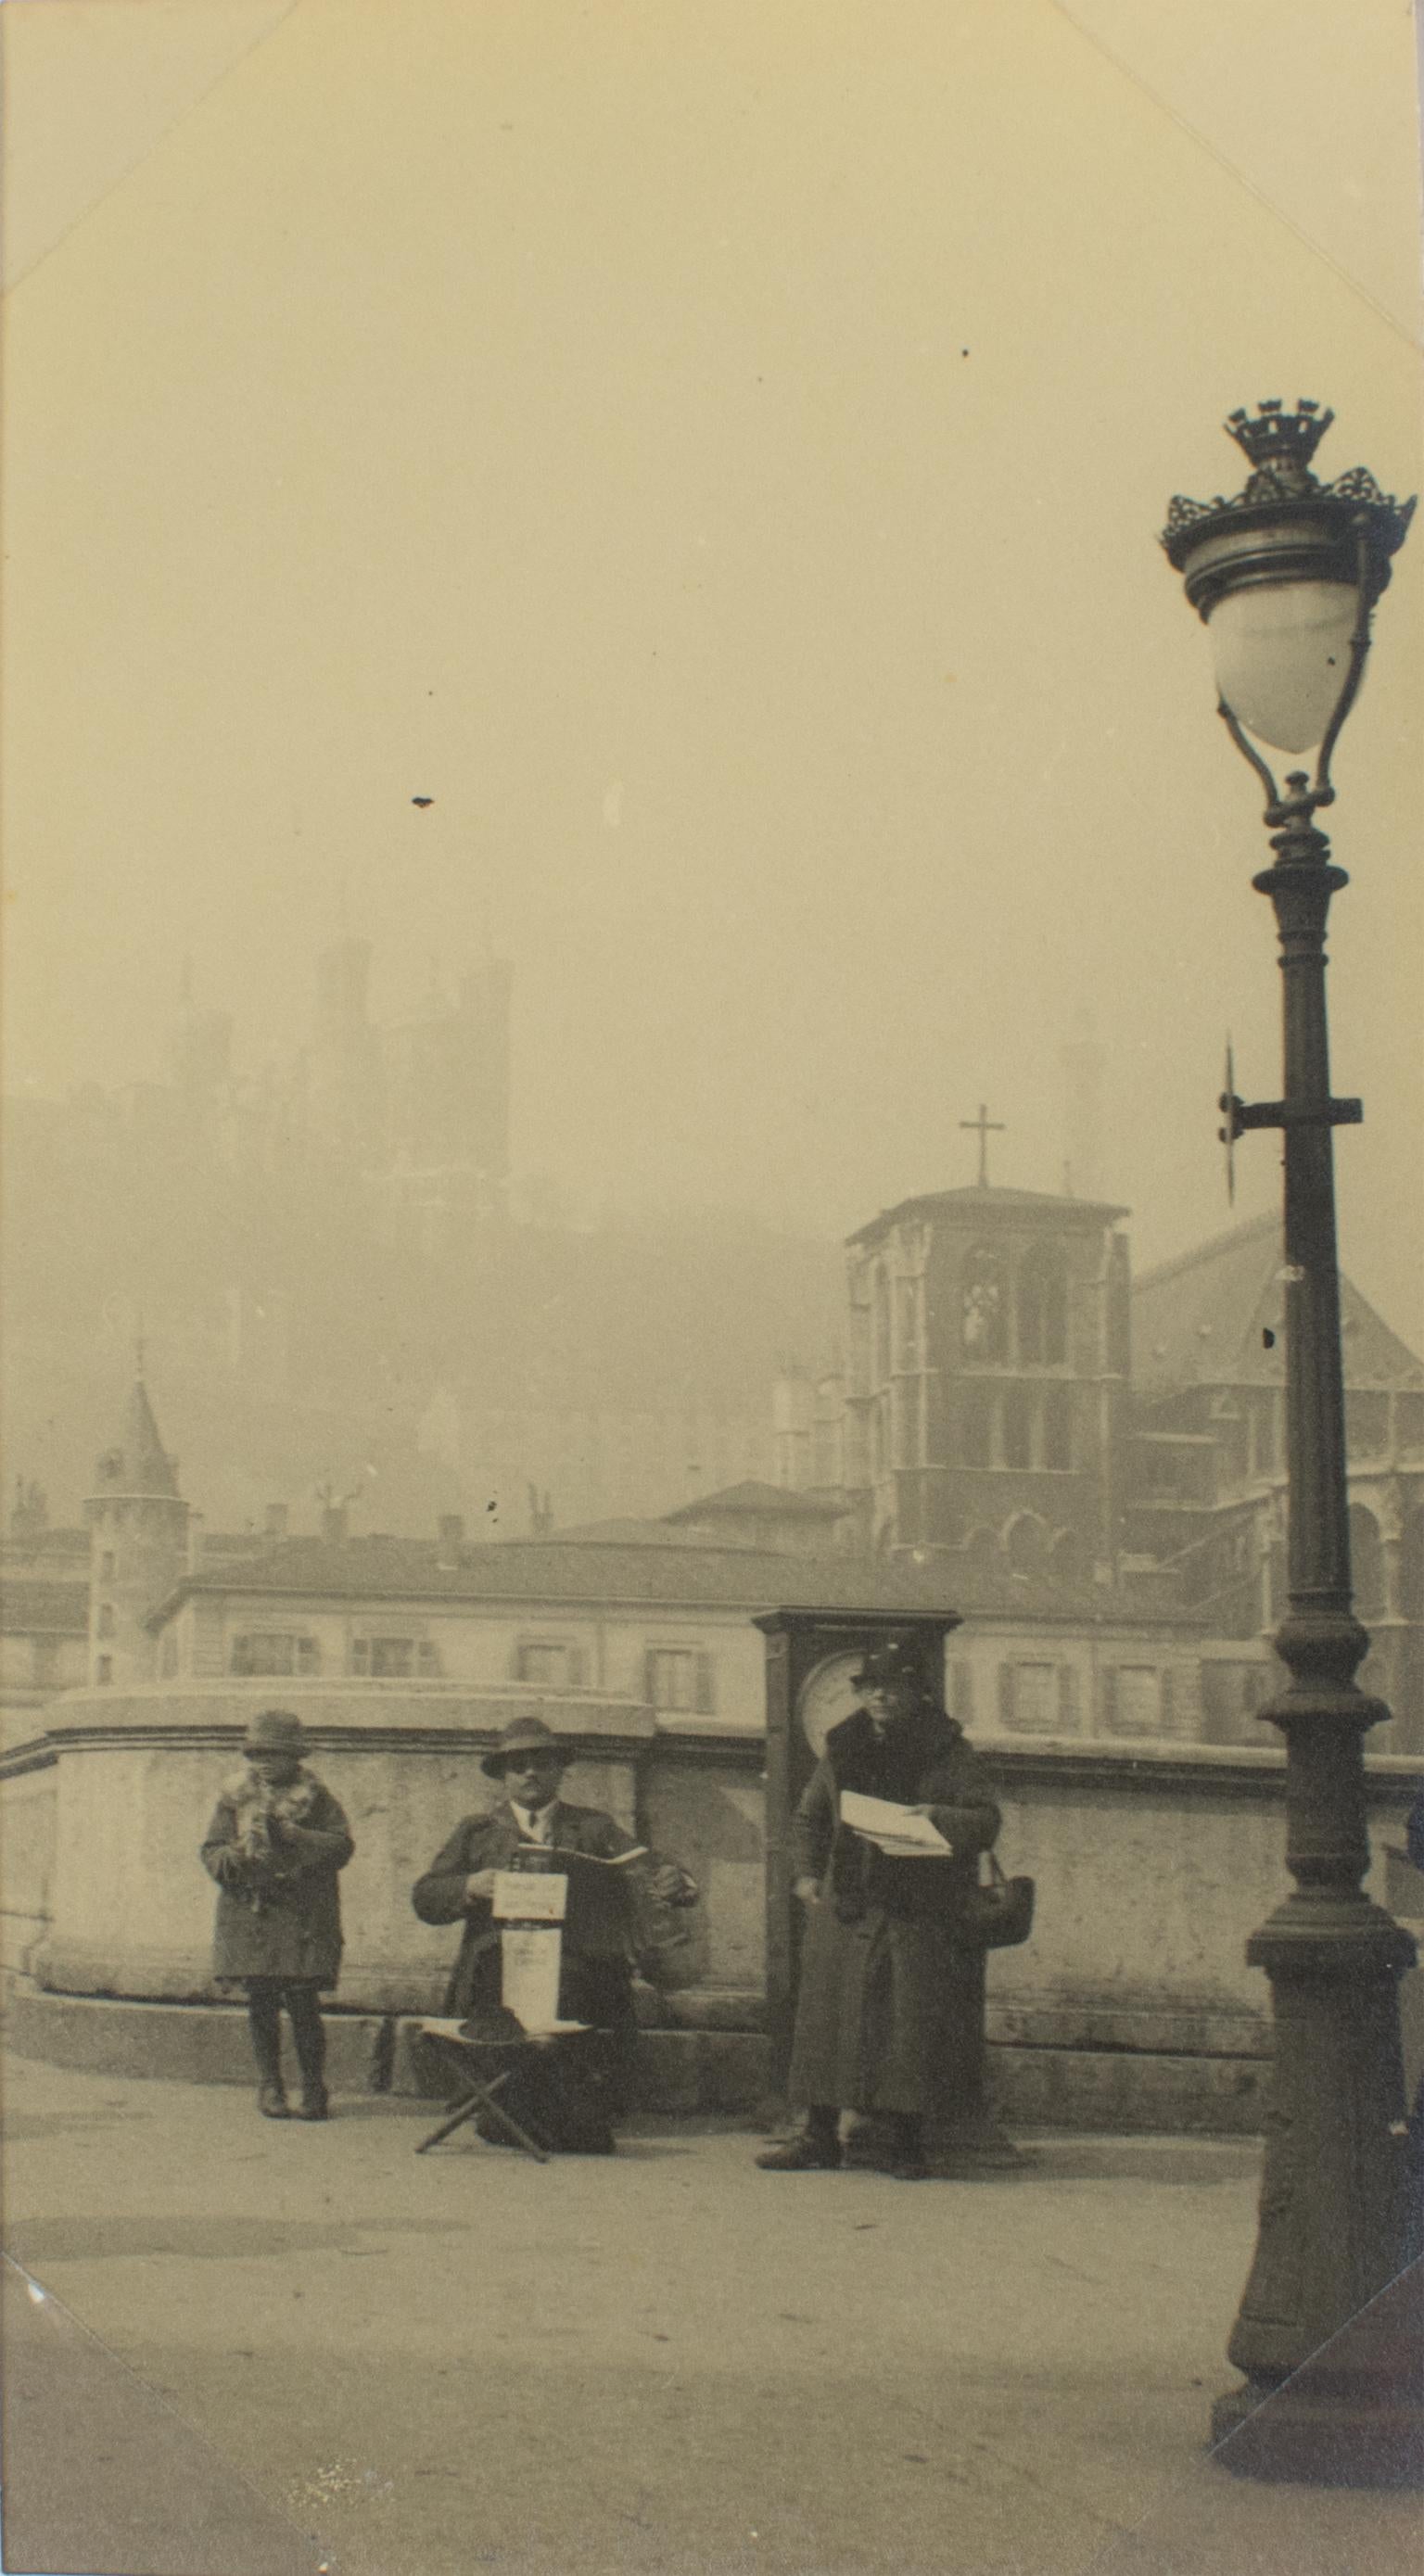 A unique original silver gelatin black and white photography. Street musician, and singer in Lyon, France, circa 1930. 
Street musician playing accordion with singers in Lyon, France, circa 1930. In the background in the fog, we can see The Basilica